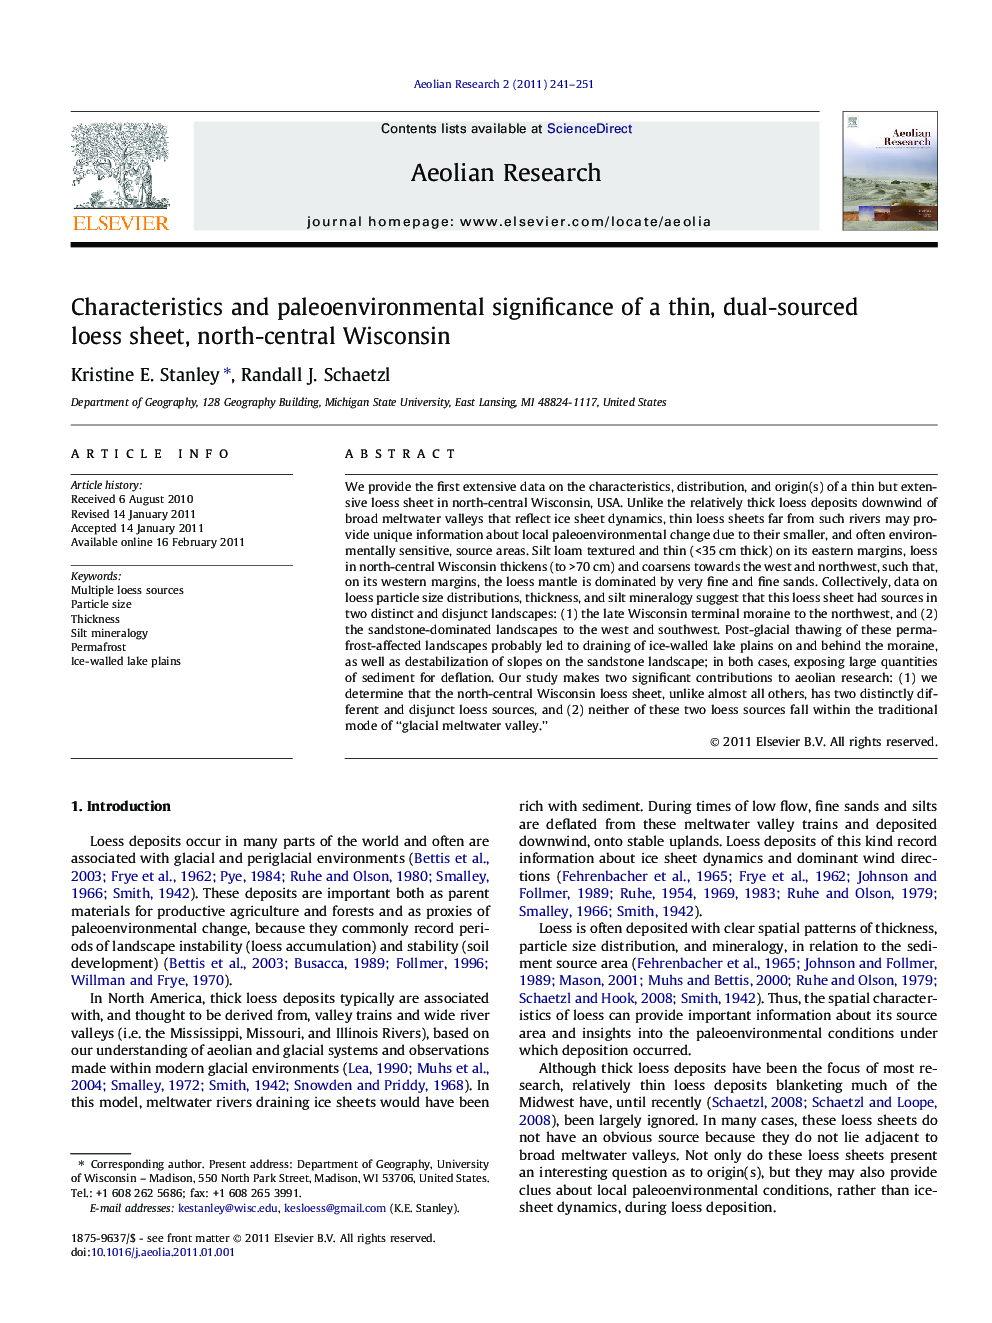 Characteristics and paleoenvironmental significance of a thin, dual-sourced loess sheet, north-central Wisconsin